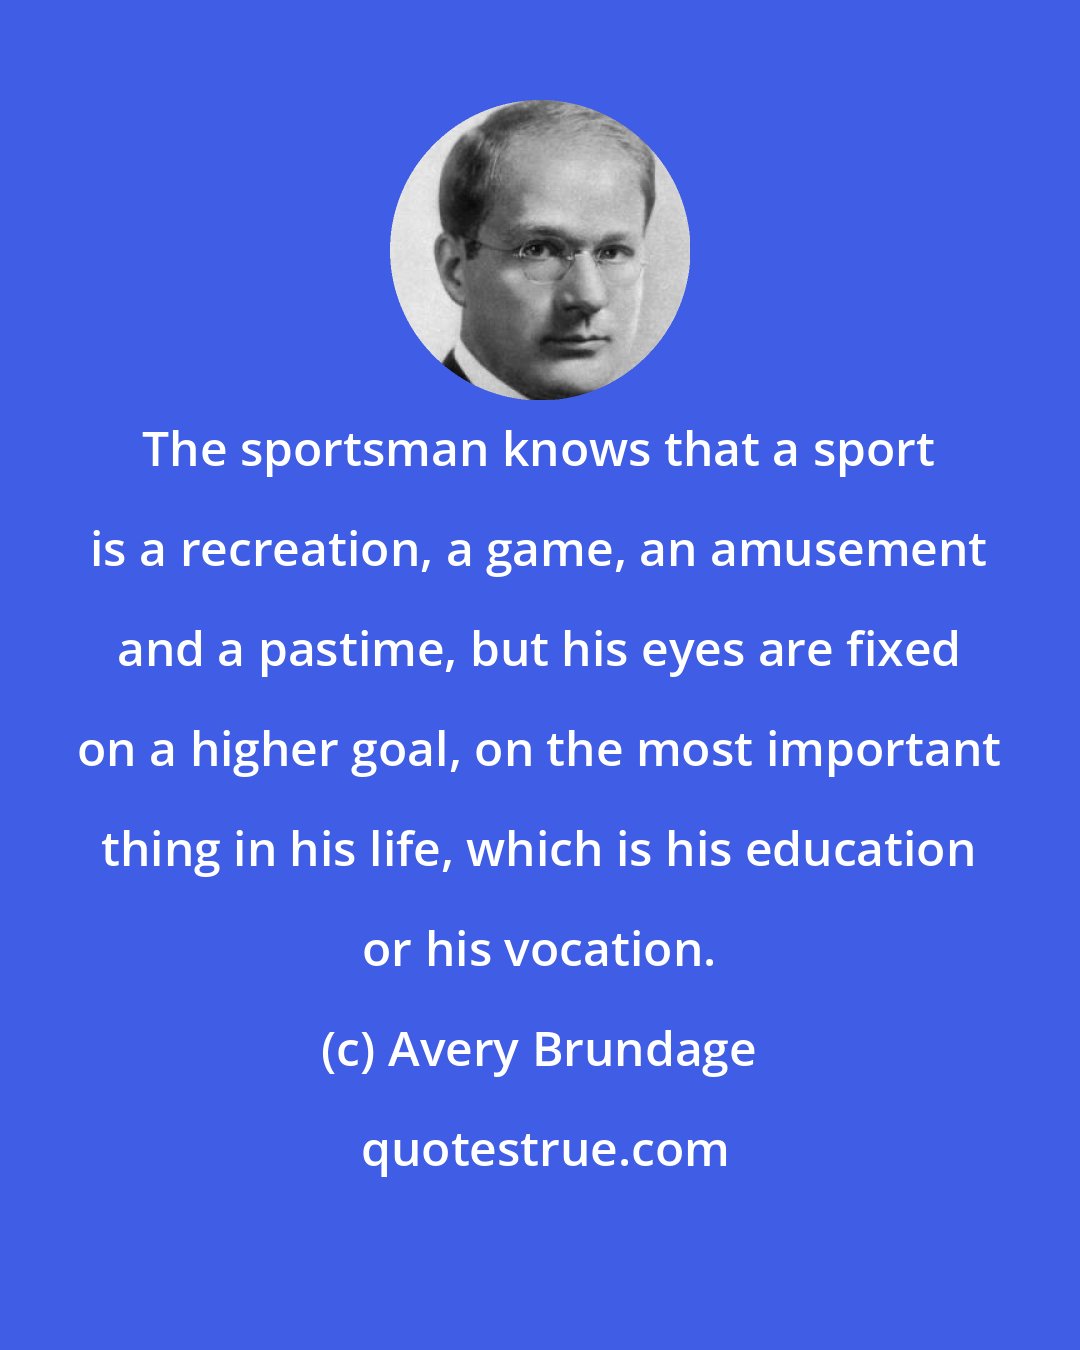 Avery Brundage: The sportsman knows that a sport is a recreation, a game, an amusement and a pastime, but his eyes are fixed on a higher goal, on the most important thing in his life, which is his education or his vocation.